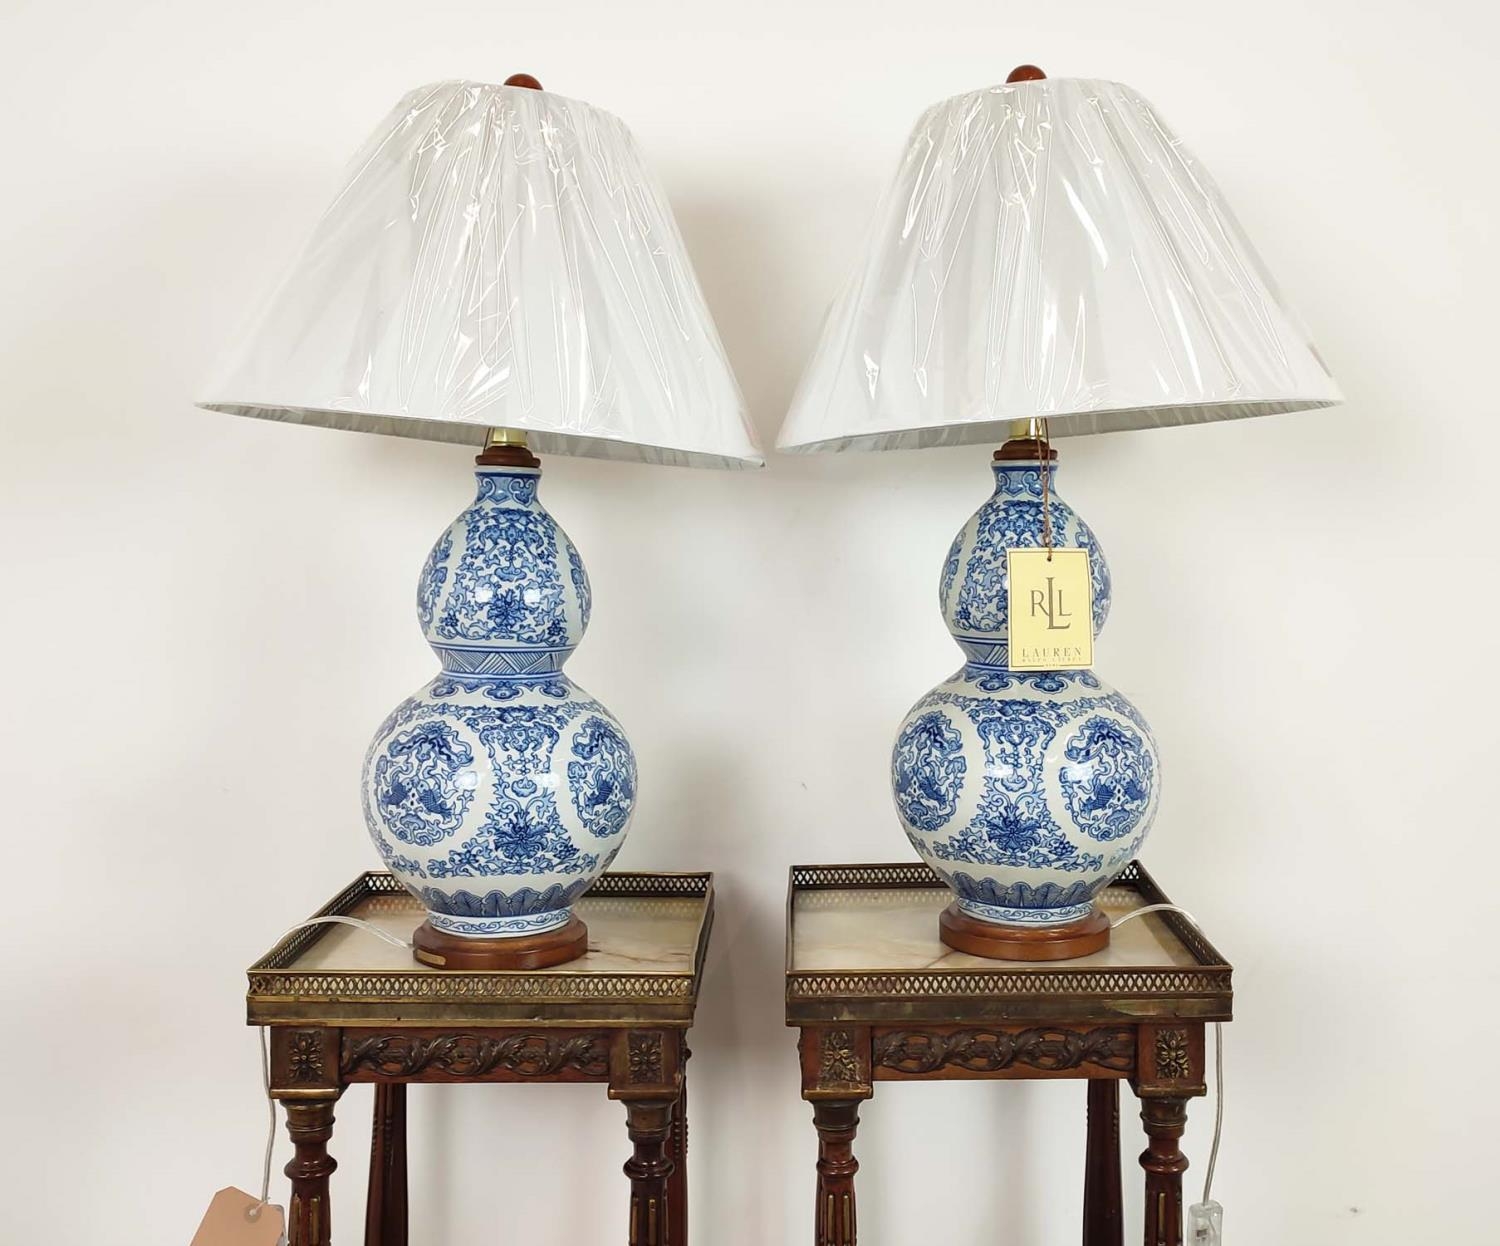 LAUREN RALPH LAUREN HOME TABLE LAMPS, a pair, double gourd design, blue and white glazed ceramic, - Image 2 of 6